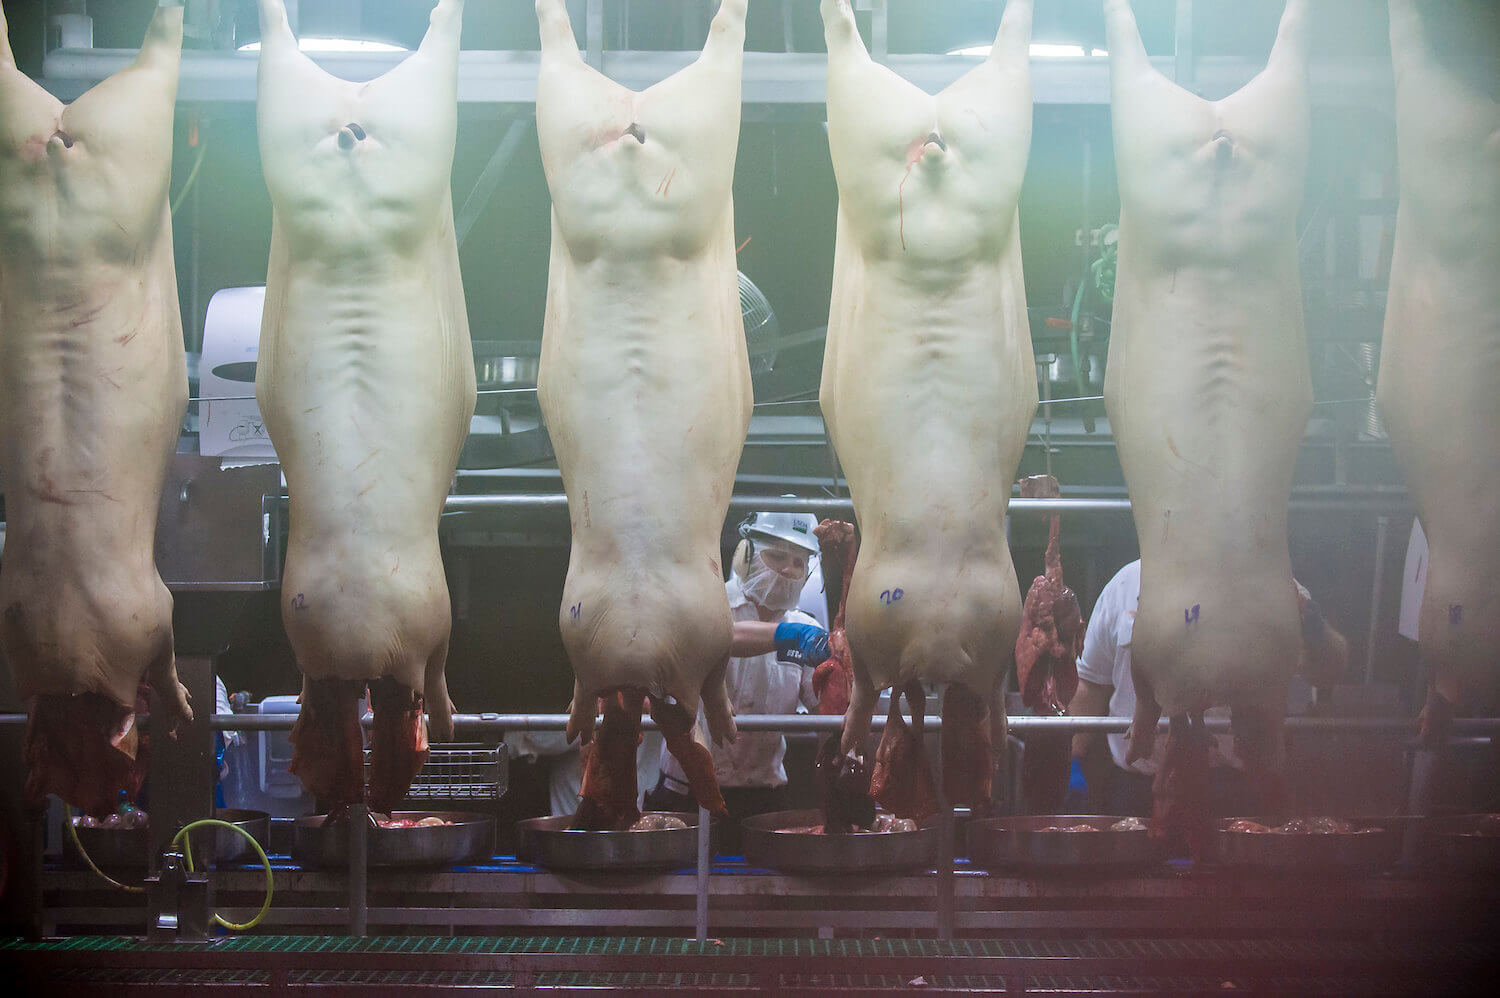 Triumph Foods pork processing facility. Pig carcasses hang with a worker behind. (June 2020)